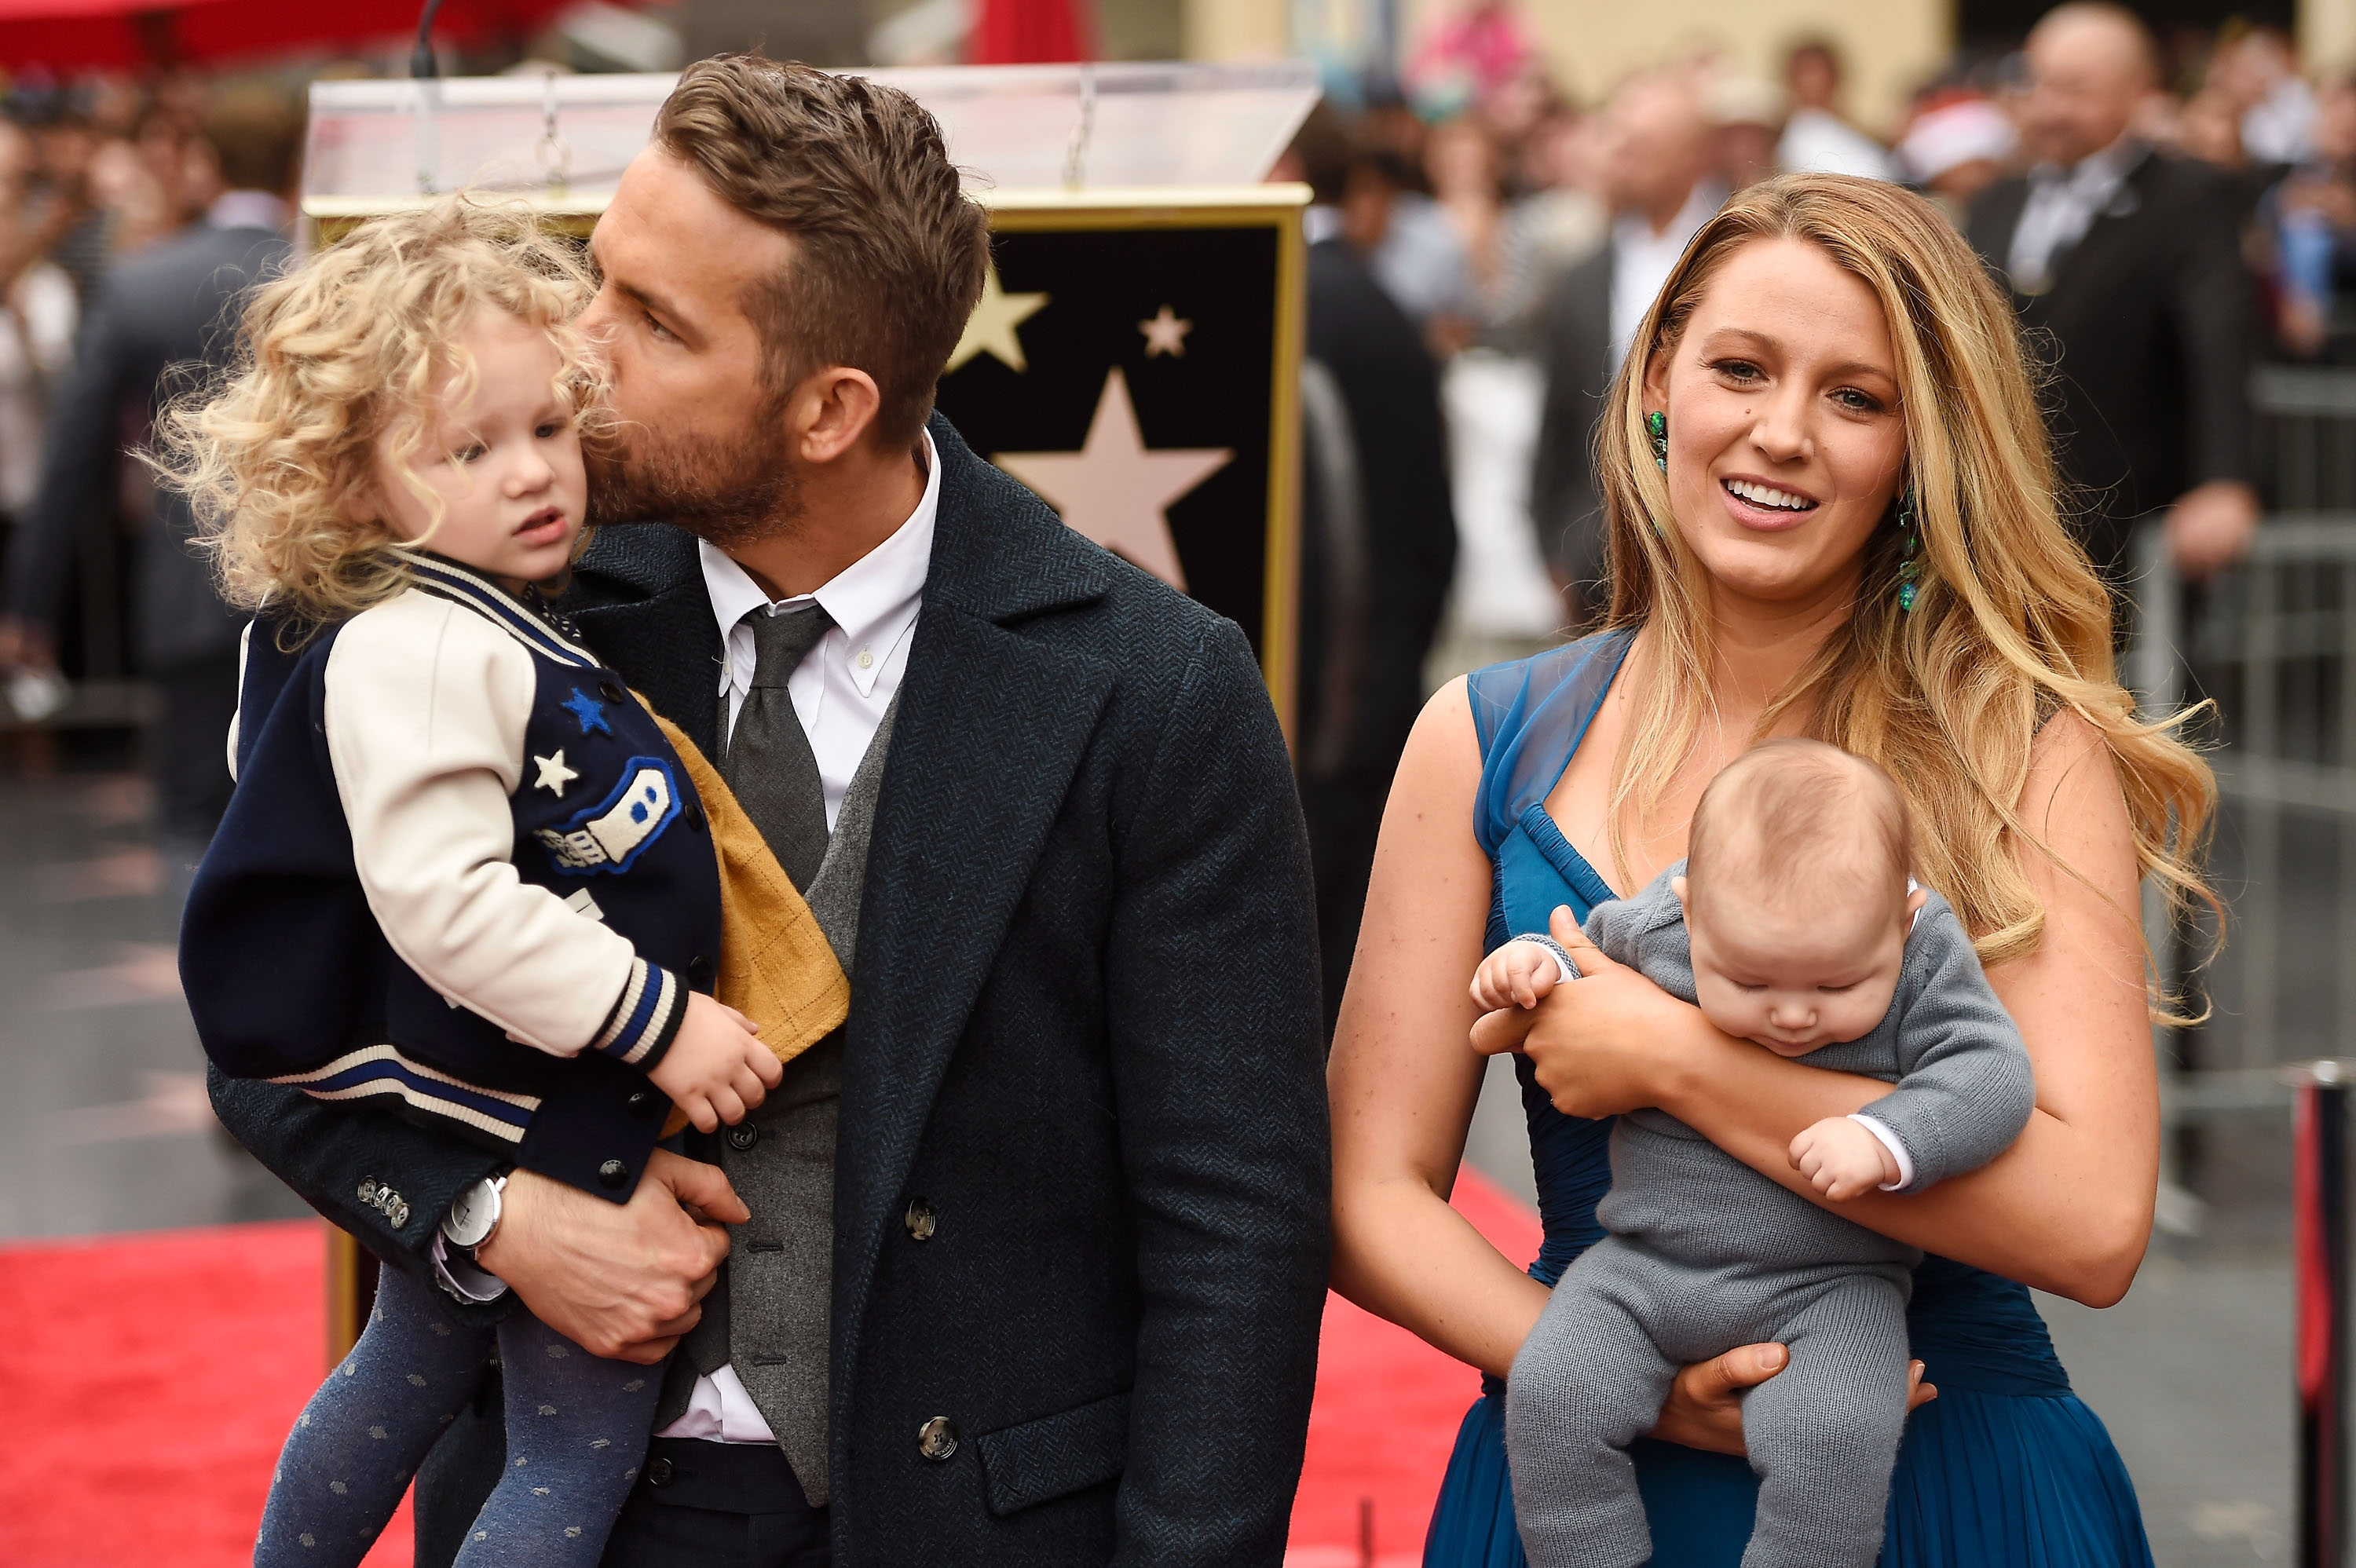 Actors Ryan Reynolds (L) and Blake Lively pose with their daughters as Ryan Reynolds is honored with star on the Hollywood Walk of Fame on December 15, 2016 in Hollywood, California | Source: Getty Images